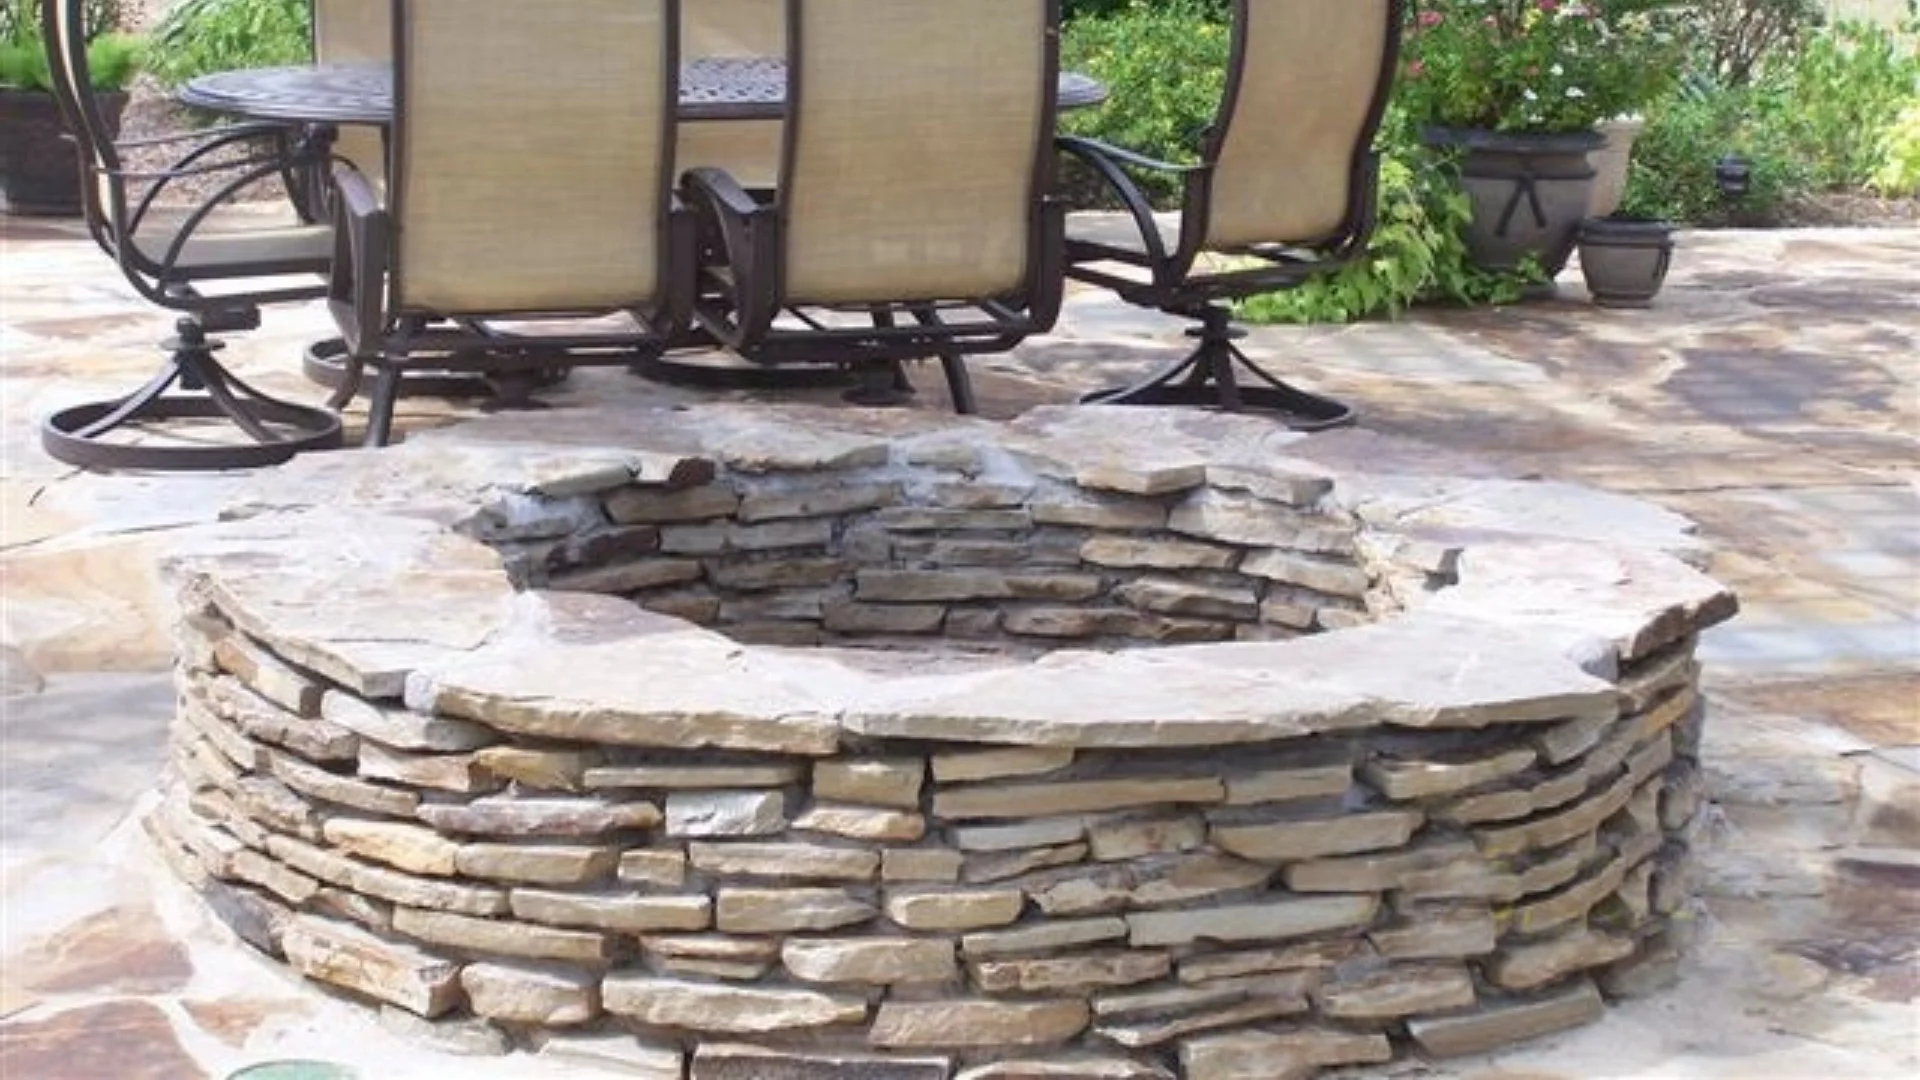 Gas, Wood & Propane-Burning Fire Pits - Which Option Should You Choose?